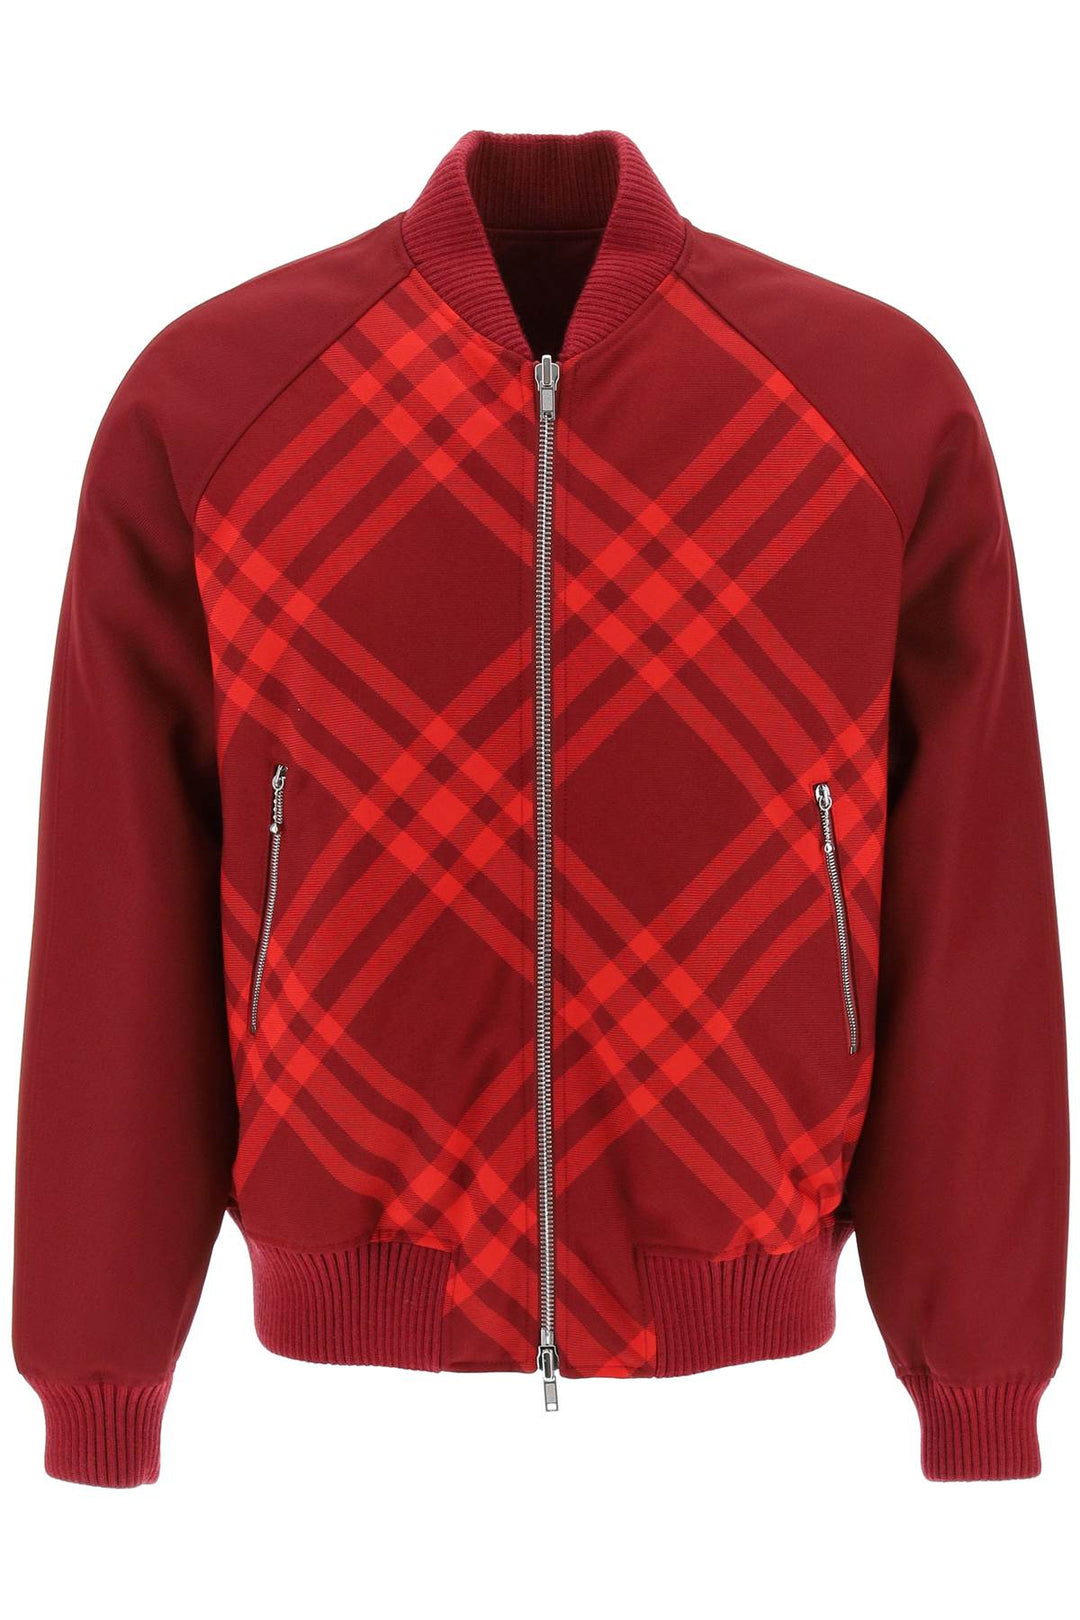 Burberry Check Reversible Bomber Jacket   Rosso